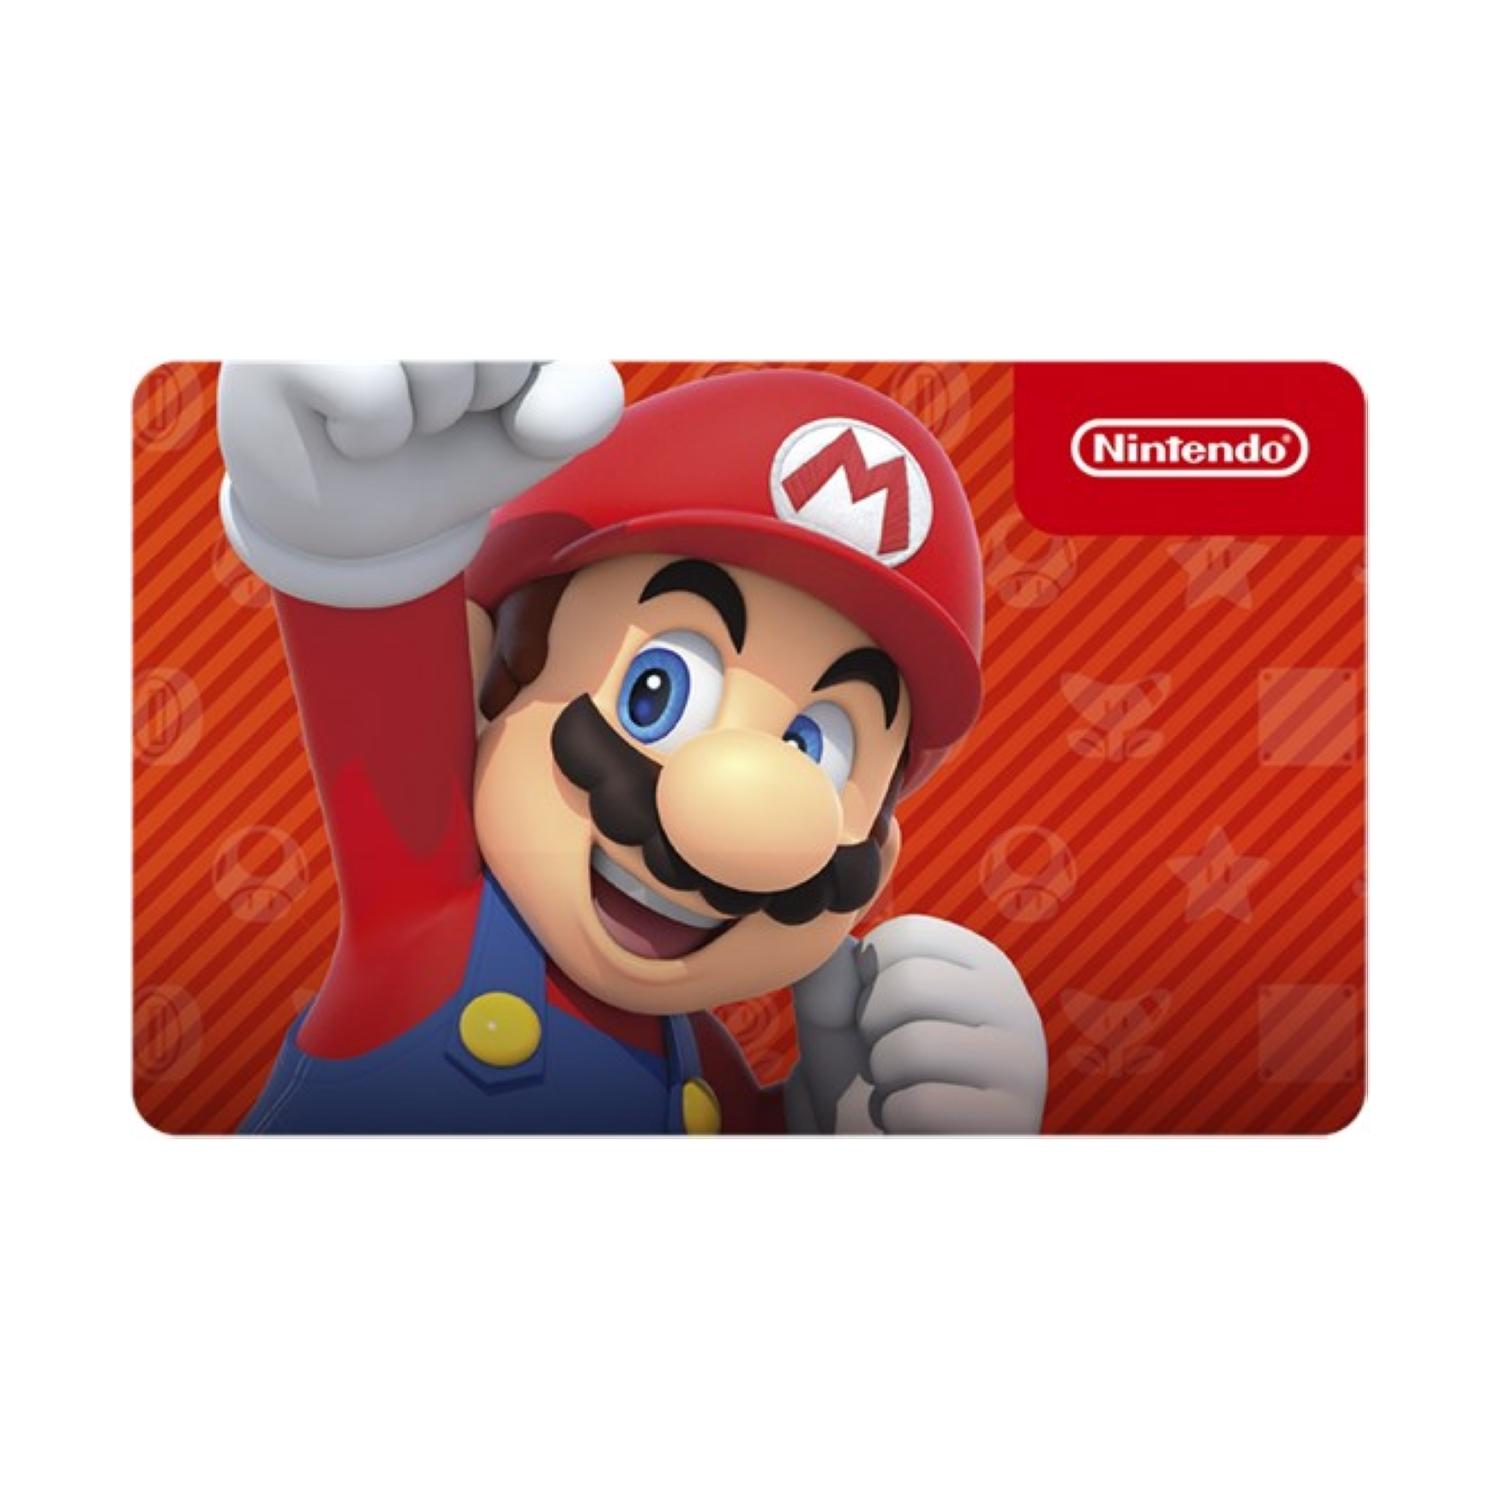 Nintendo EShop $20 Gift Card (Email Delivery) | atelier-yuwa.ciao.jp